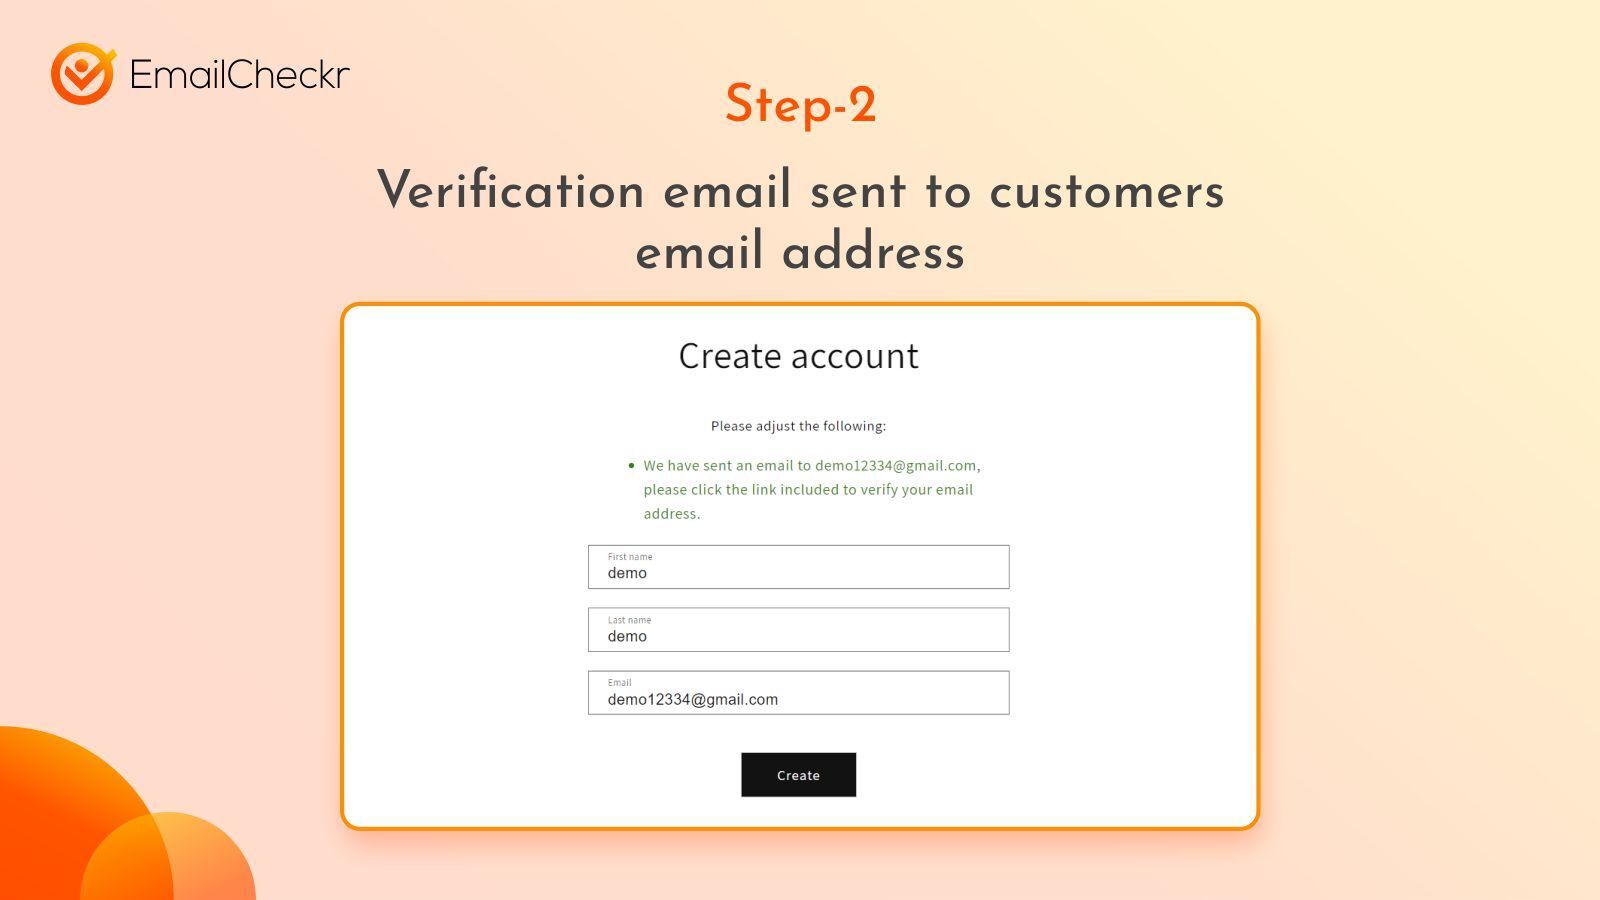 Verification email sent to customers email address